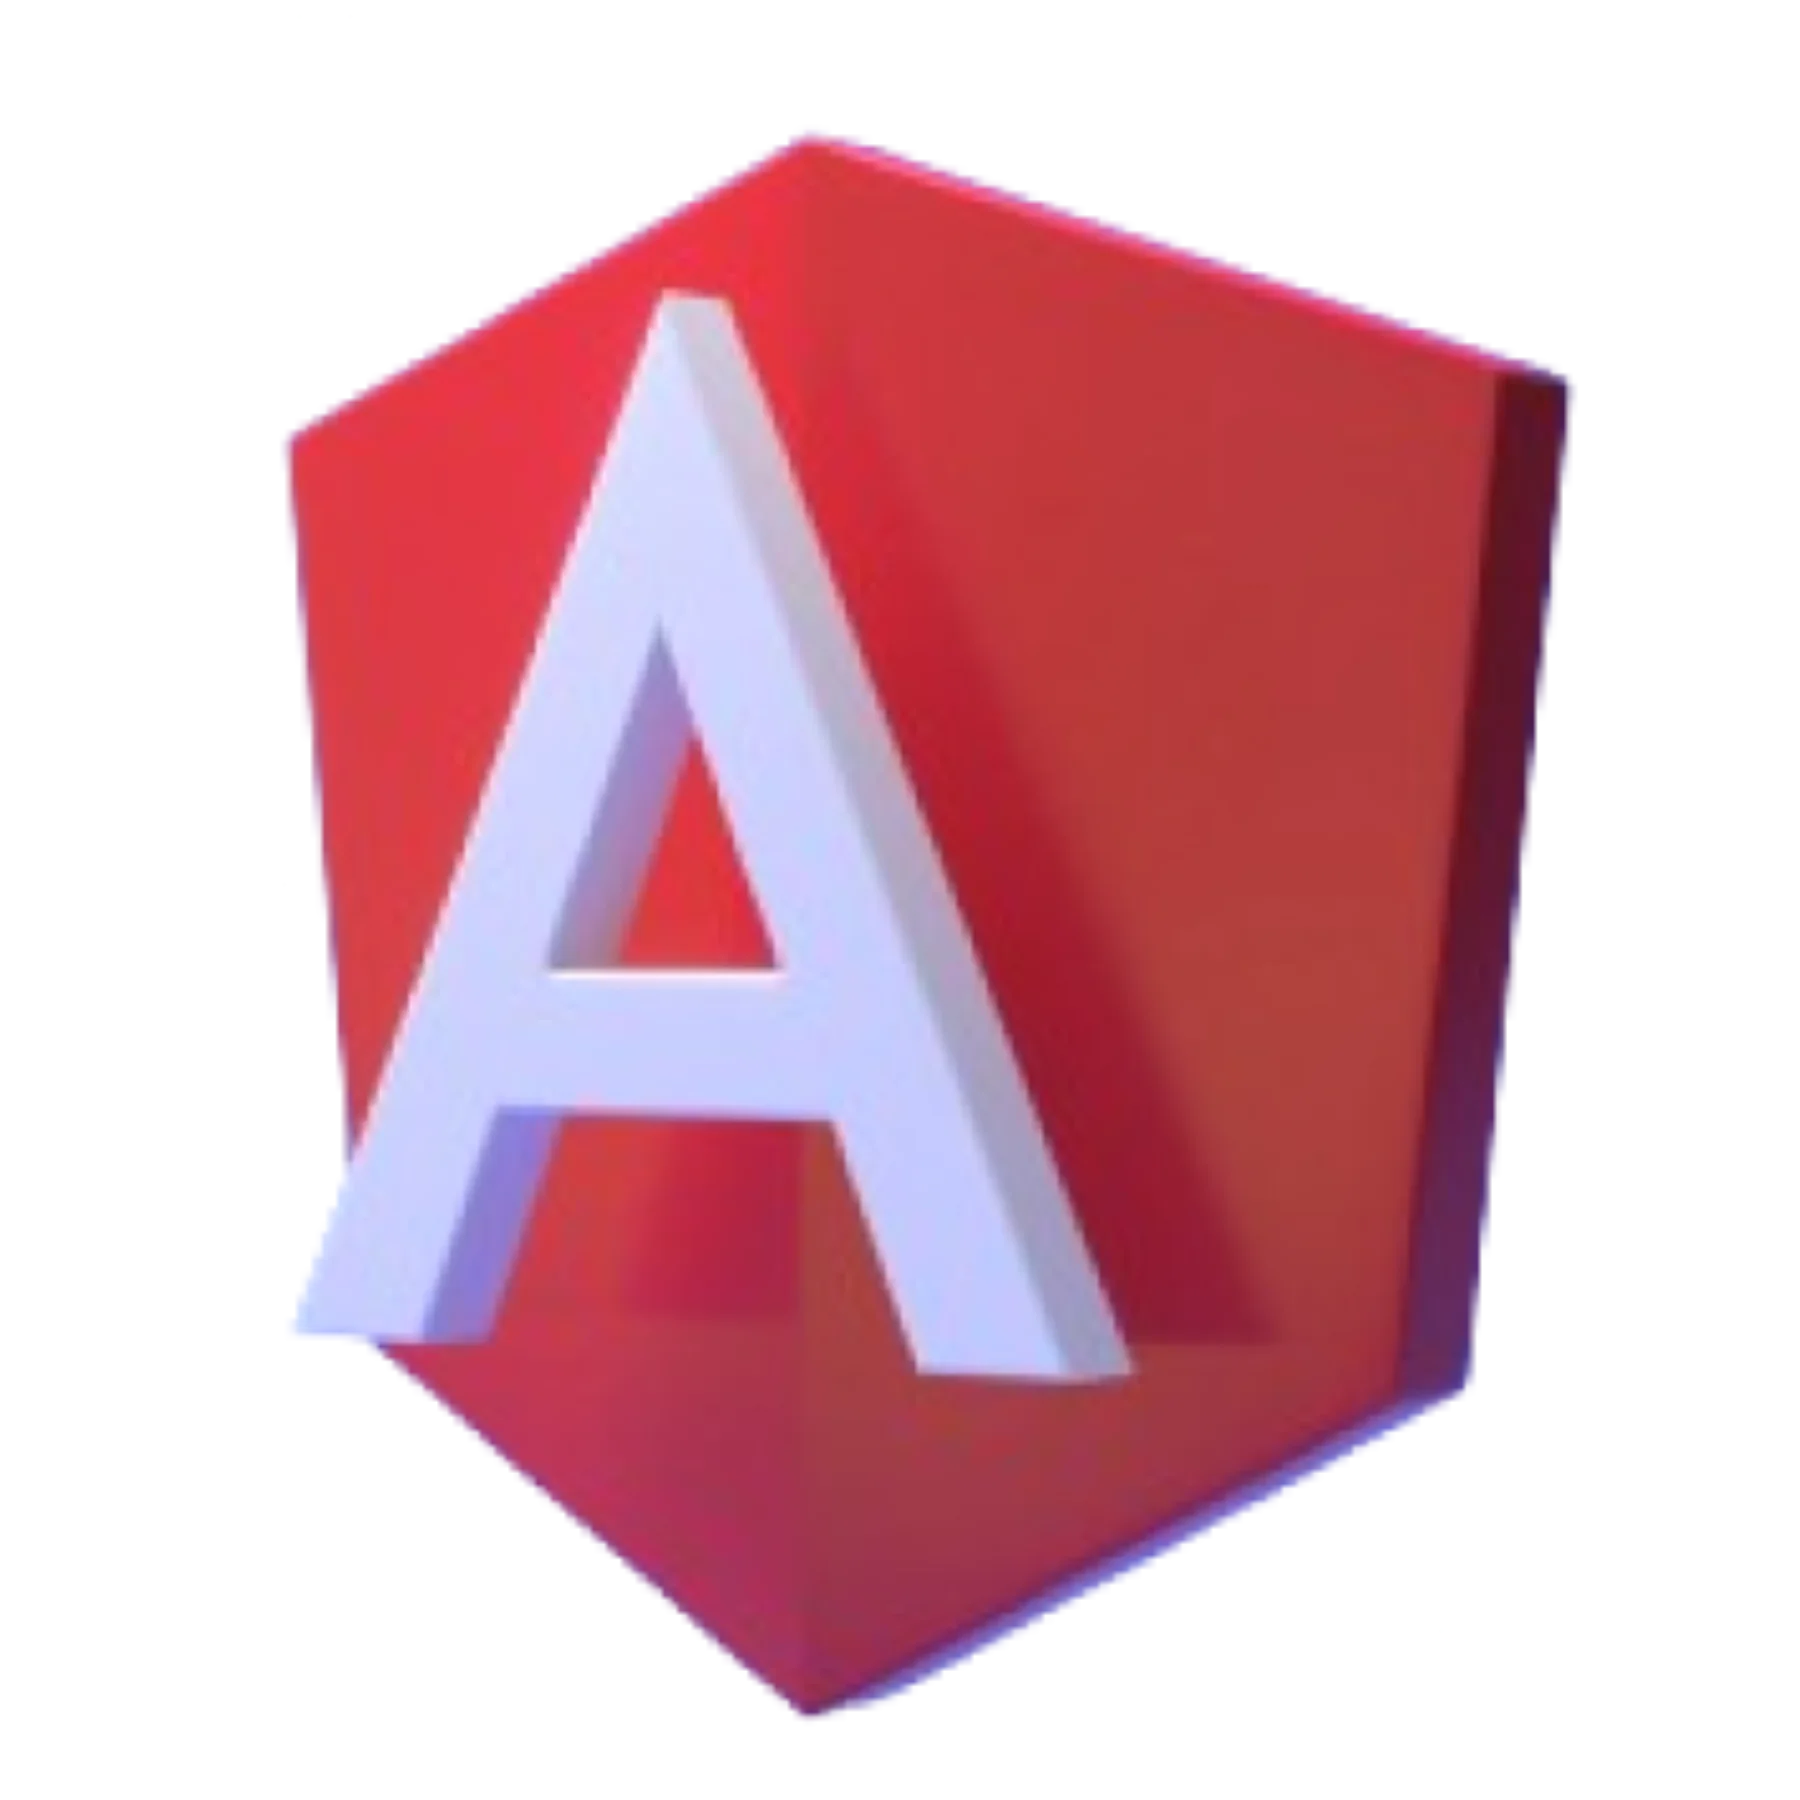 Expert AngularJS development company specializing in creating dynamic web applications, leveraging cutting-edge technologies for scalable solutions.